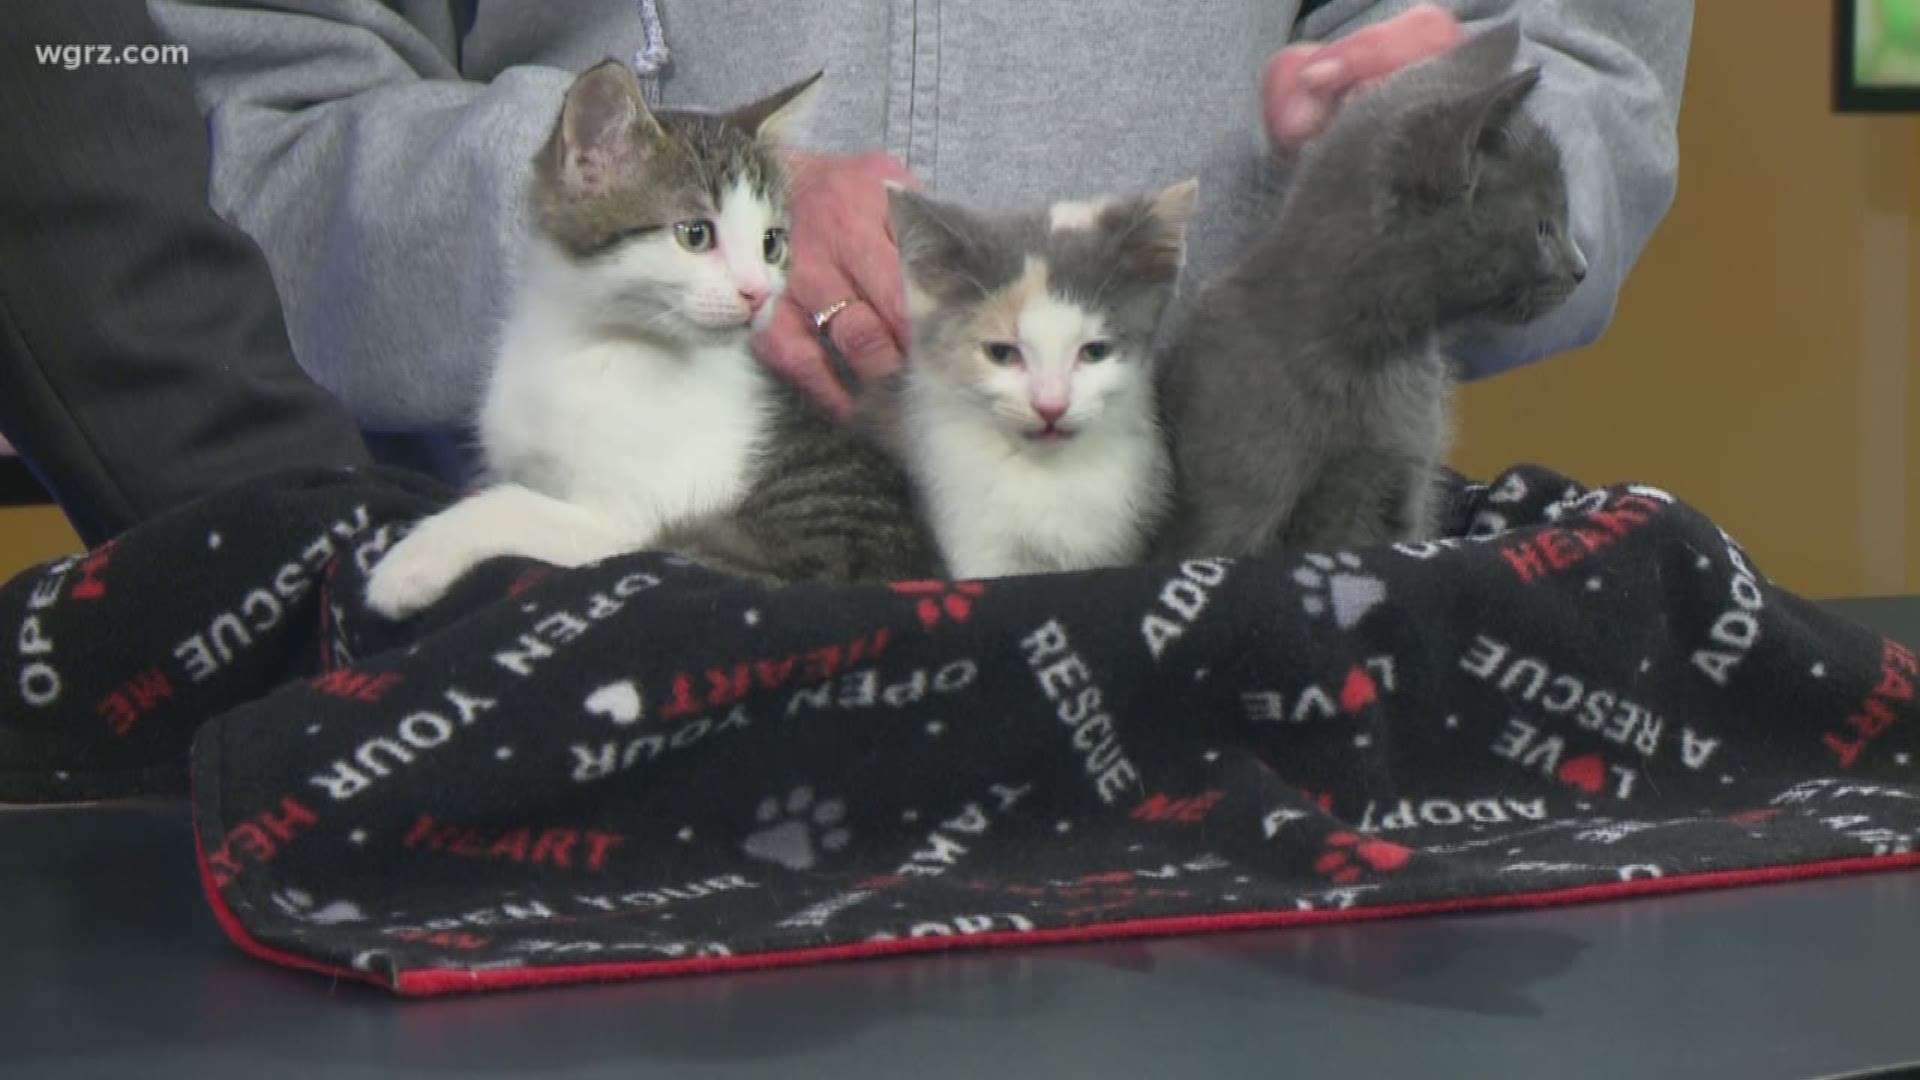 Violet, Vino, and Victor are all up for adoption through the City of Buffalo Animal Shelter! These cuddly kitties will be at the PetSmart on Elmwood Saturday searching for their forever homes!